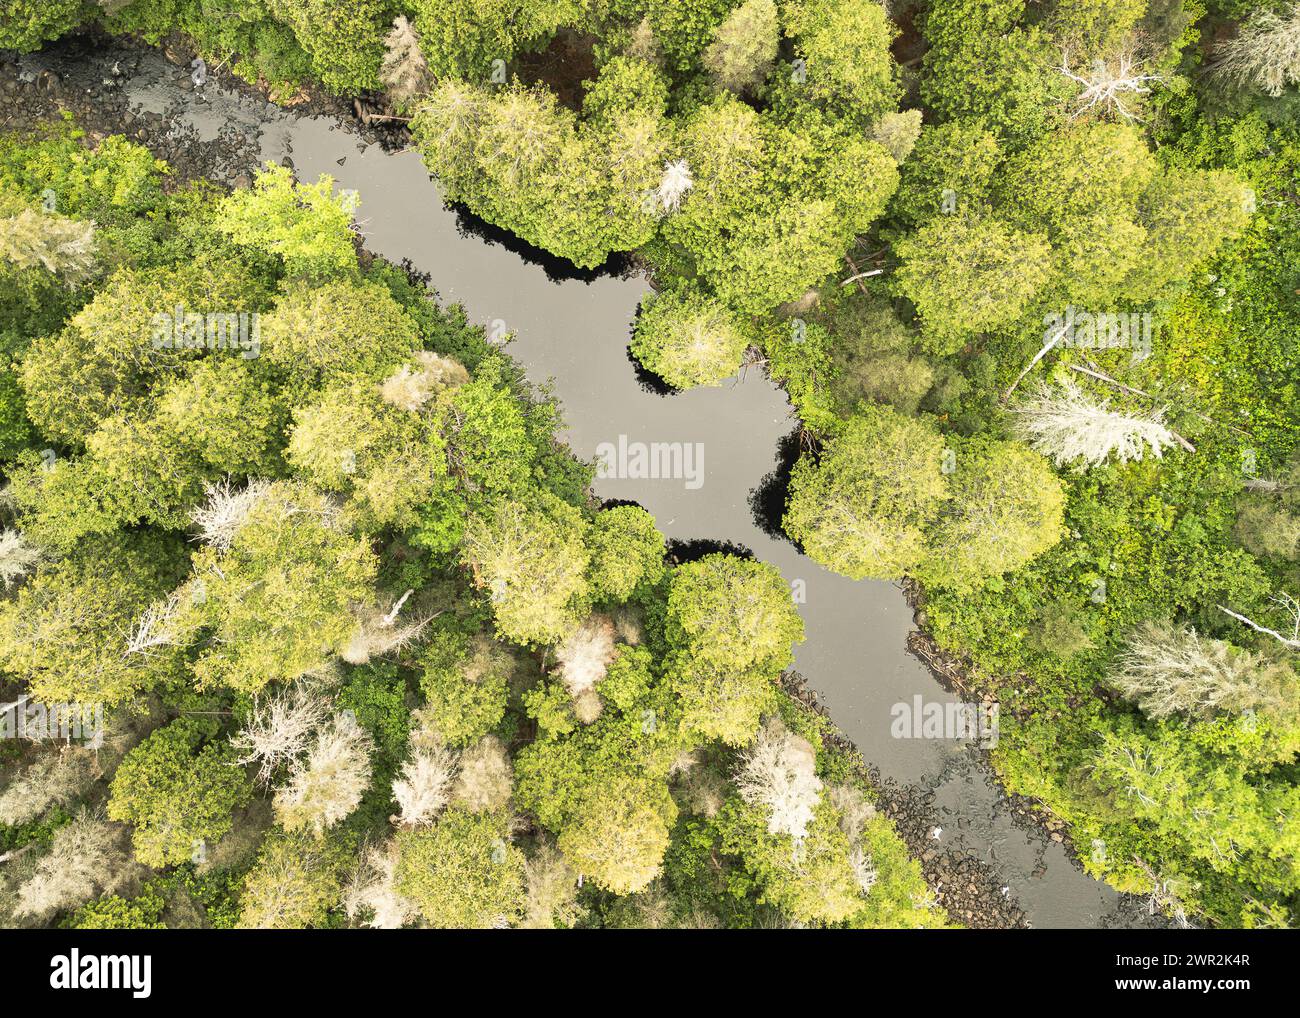 Aerial Image of a River Running diagonally through the Forest in a straight down view Stock Photo